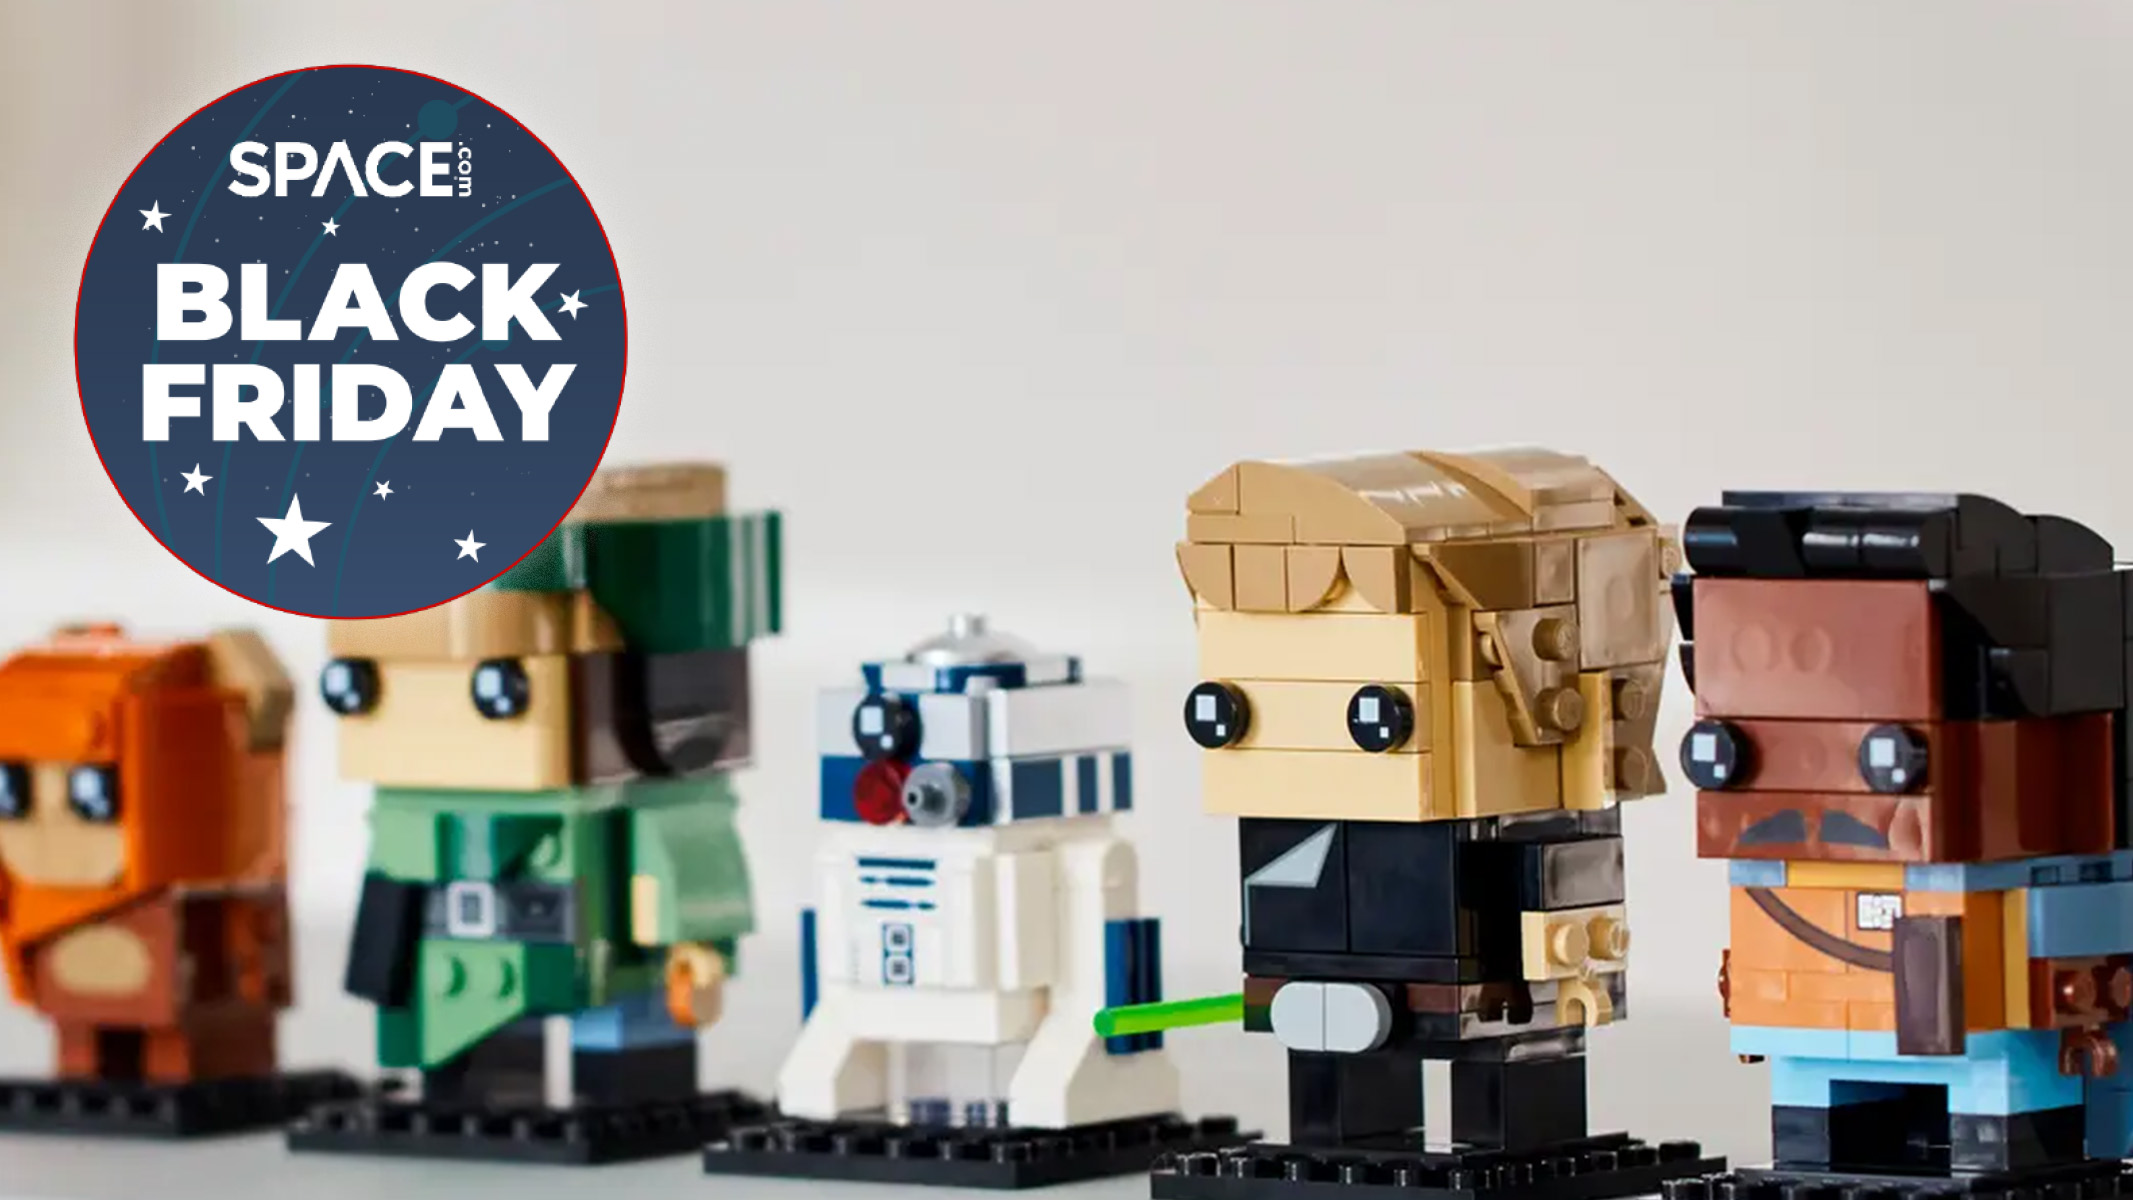 Save 40% on this adorable LEGO Battle of Endor Heroes set this Black Friday weekend Space